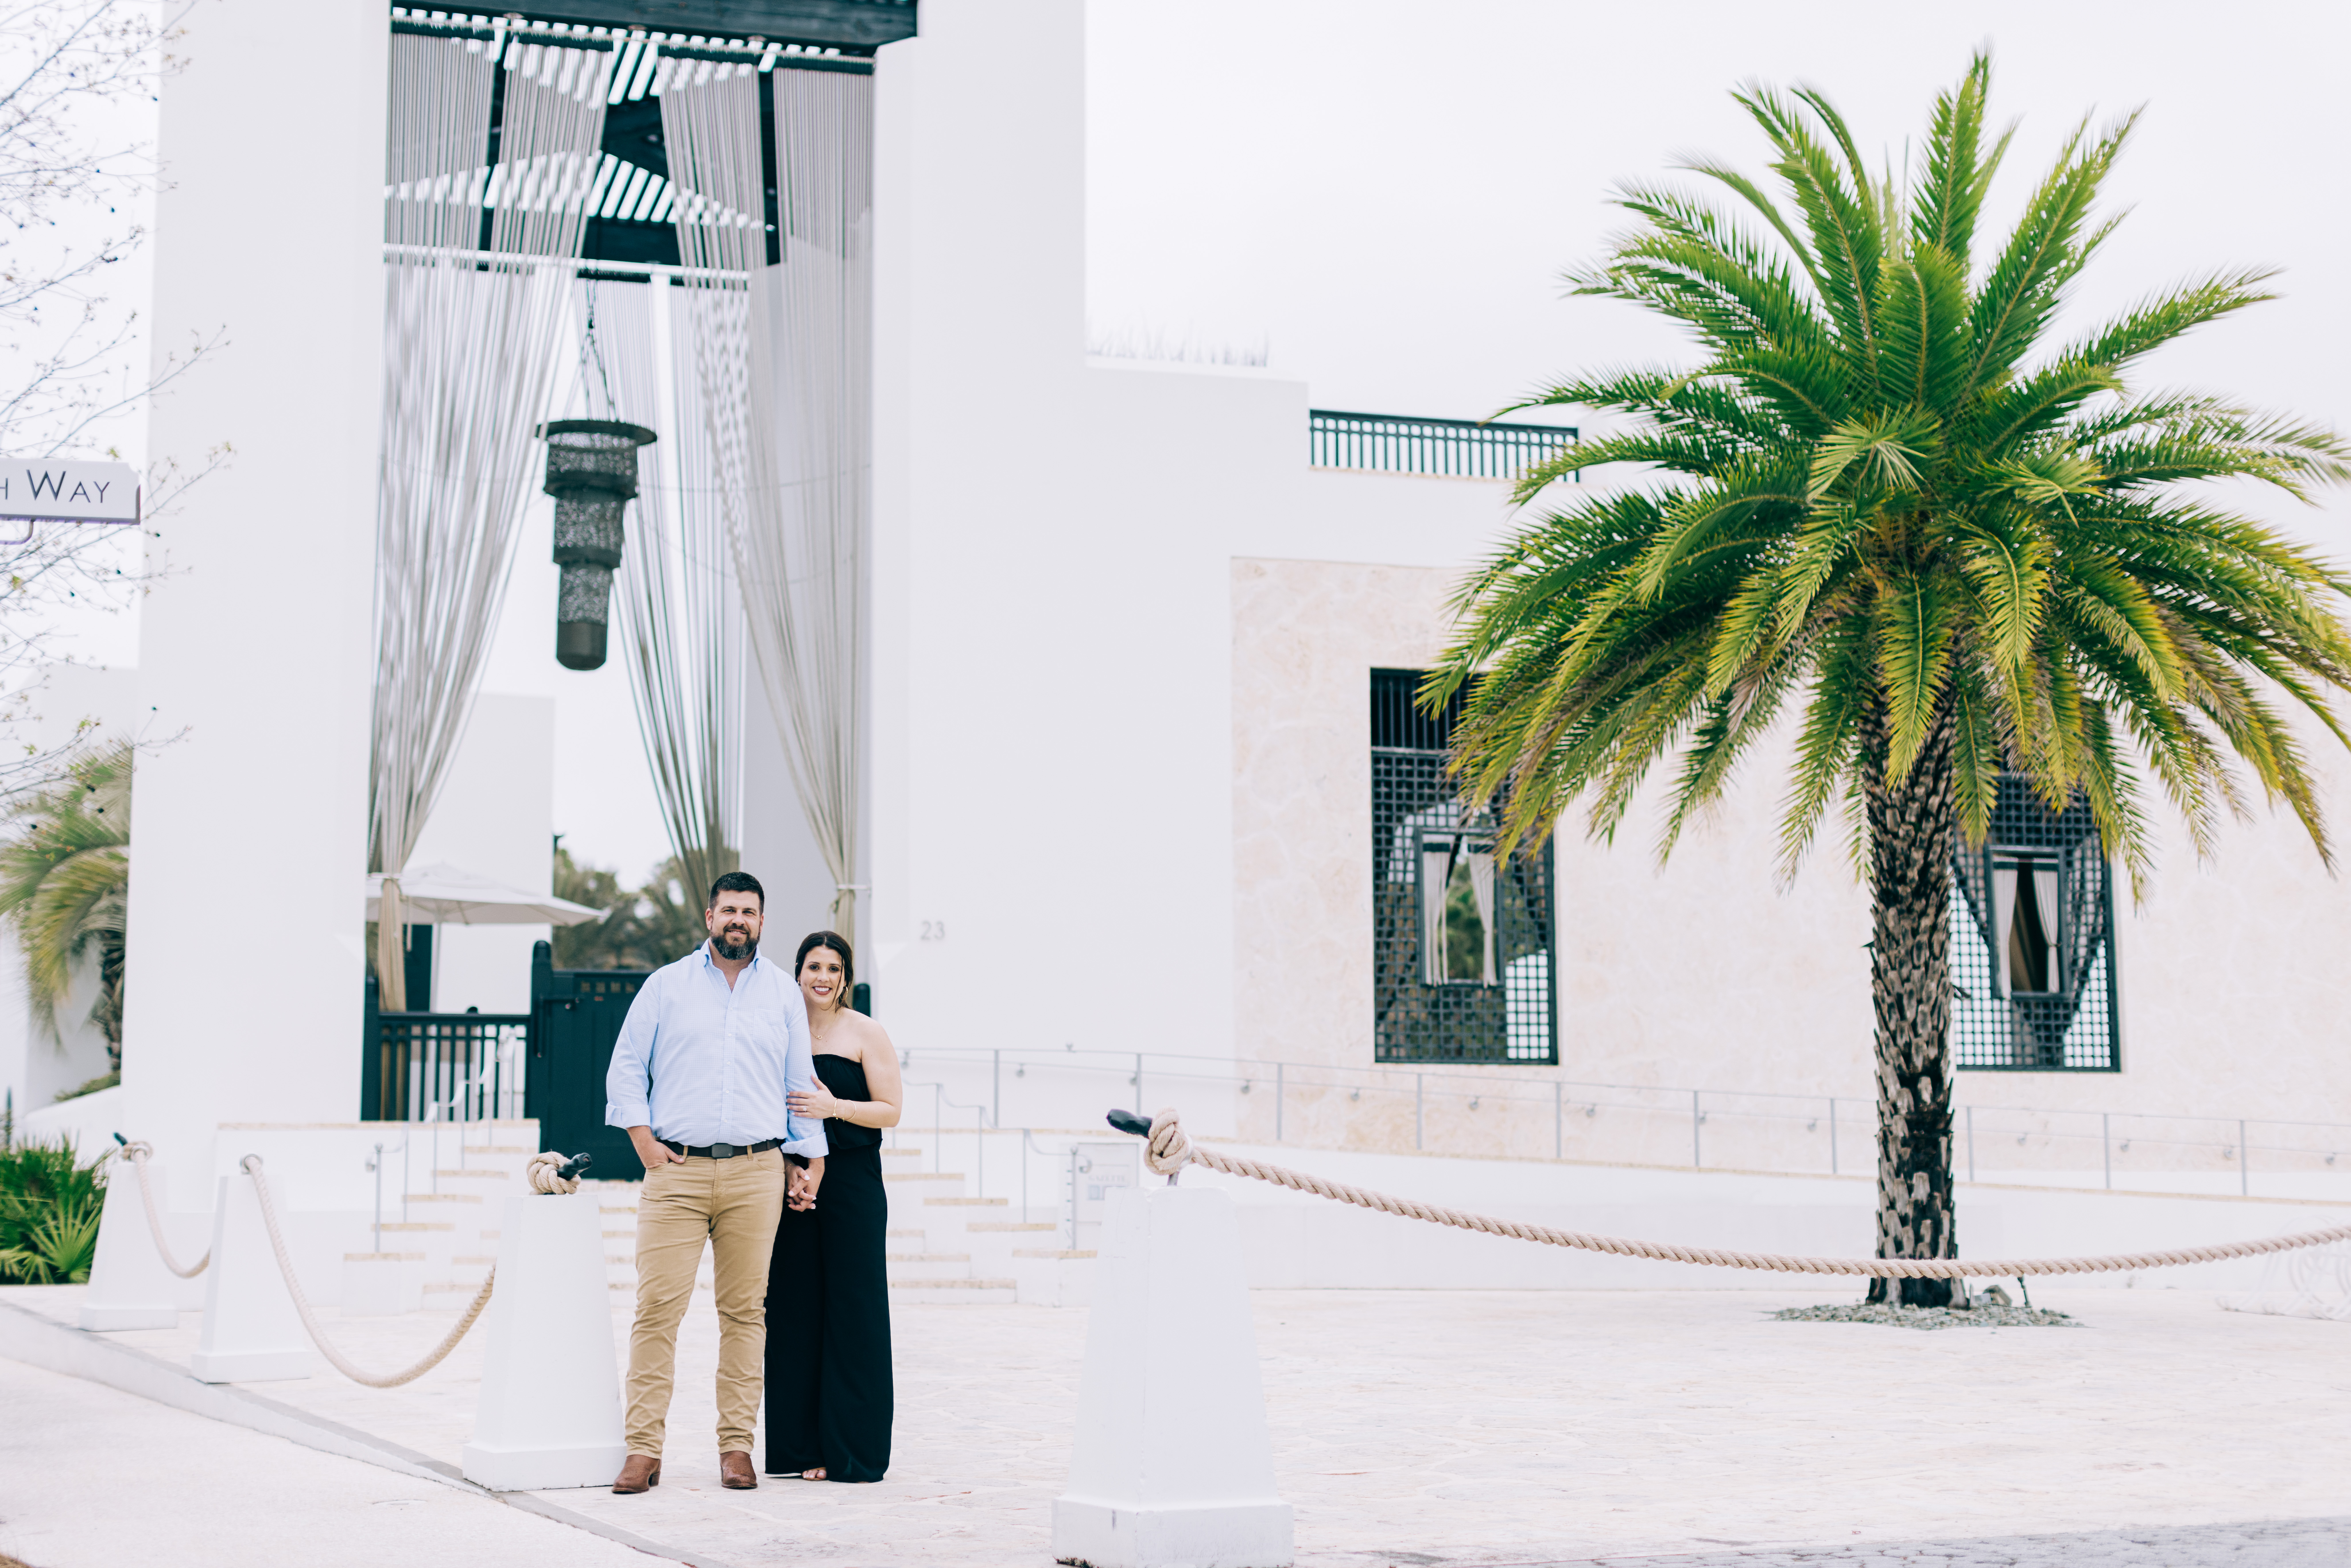 Engagement photos at Alys Beach, near Rosemary Beach, Florida on 30A scenic route.